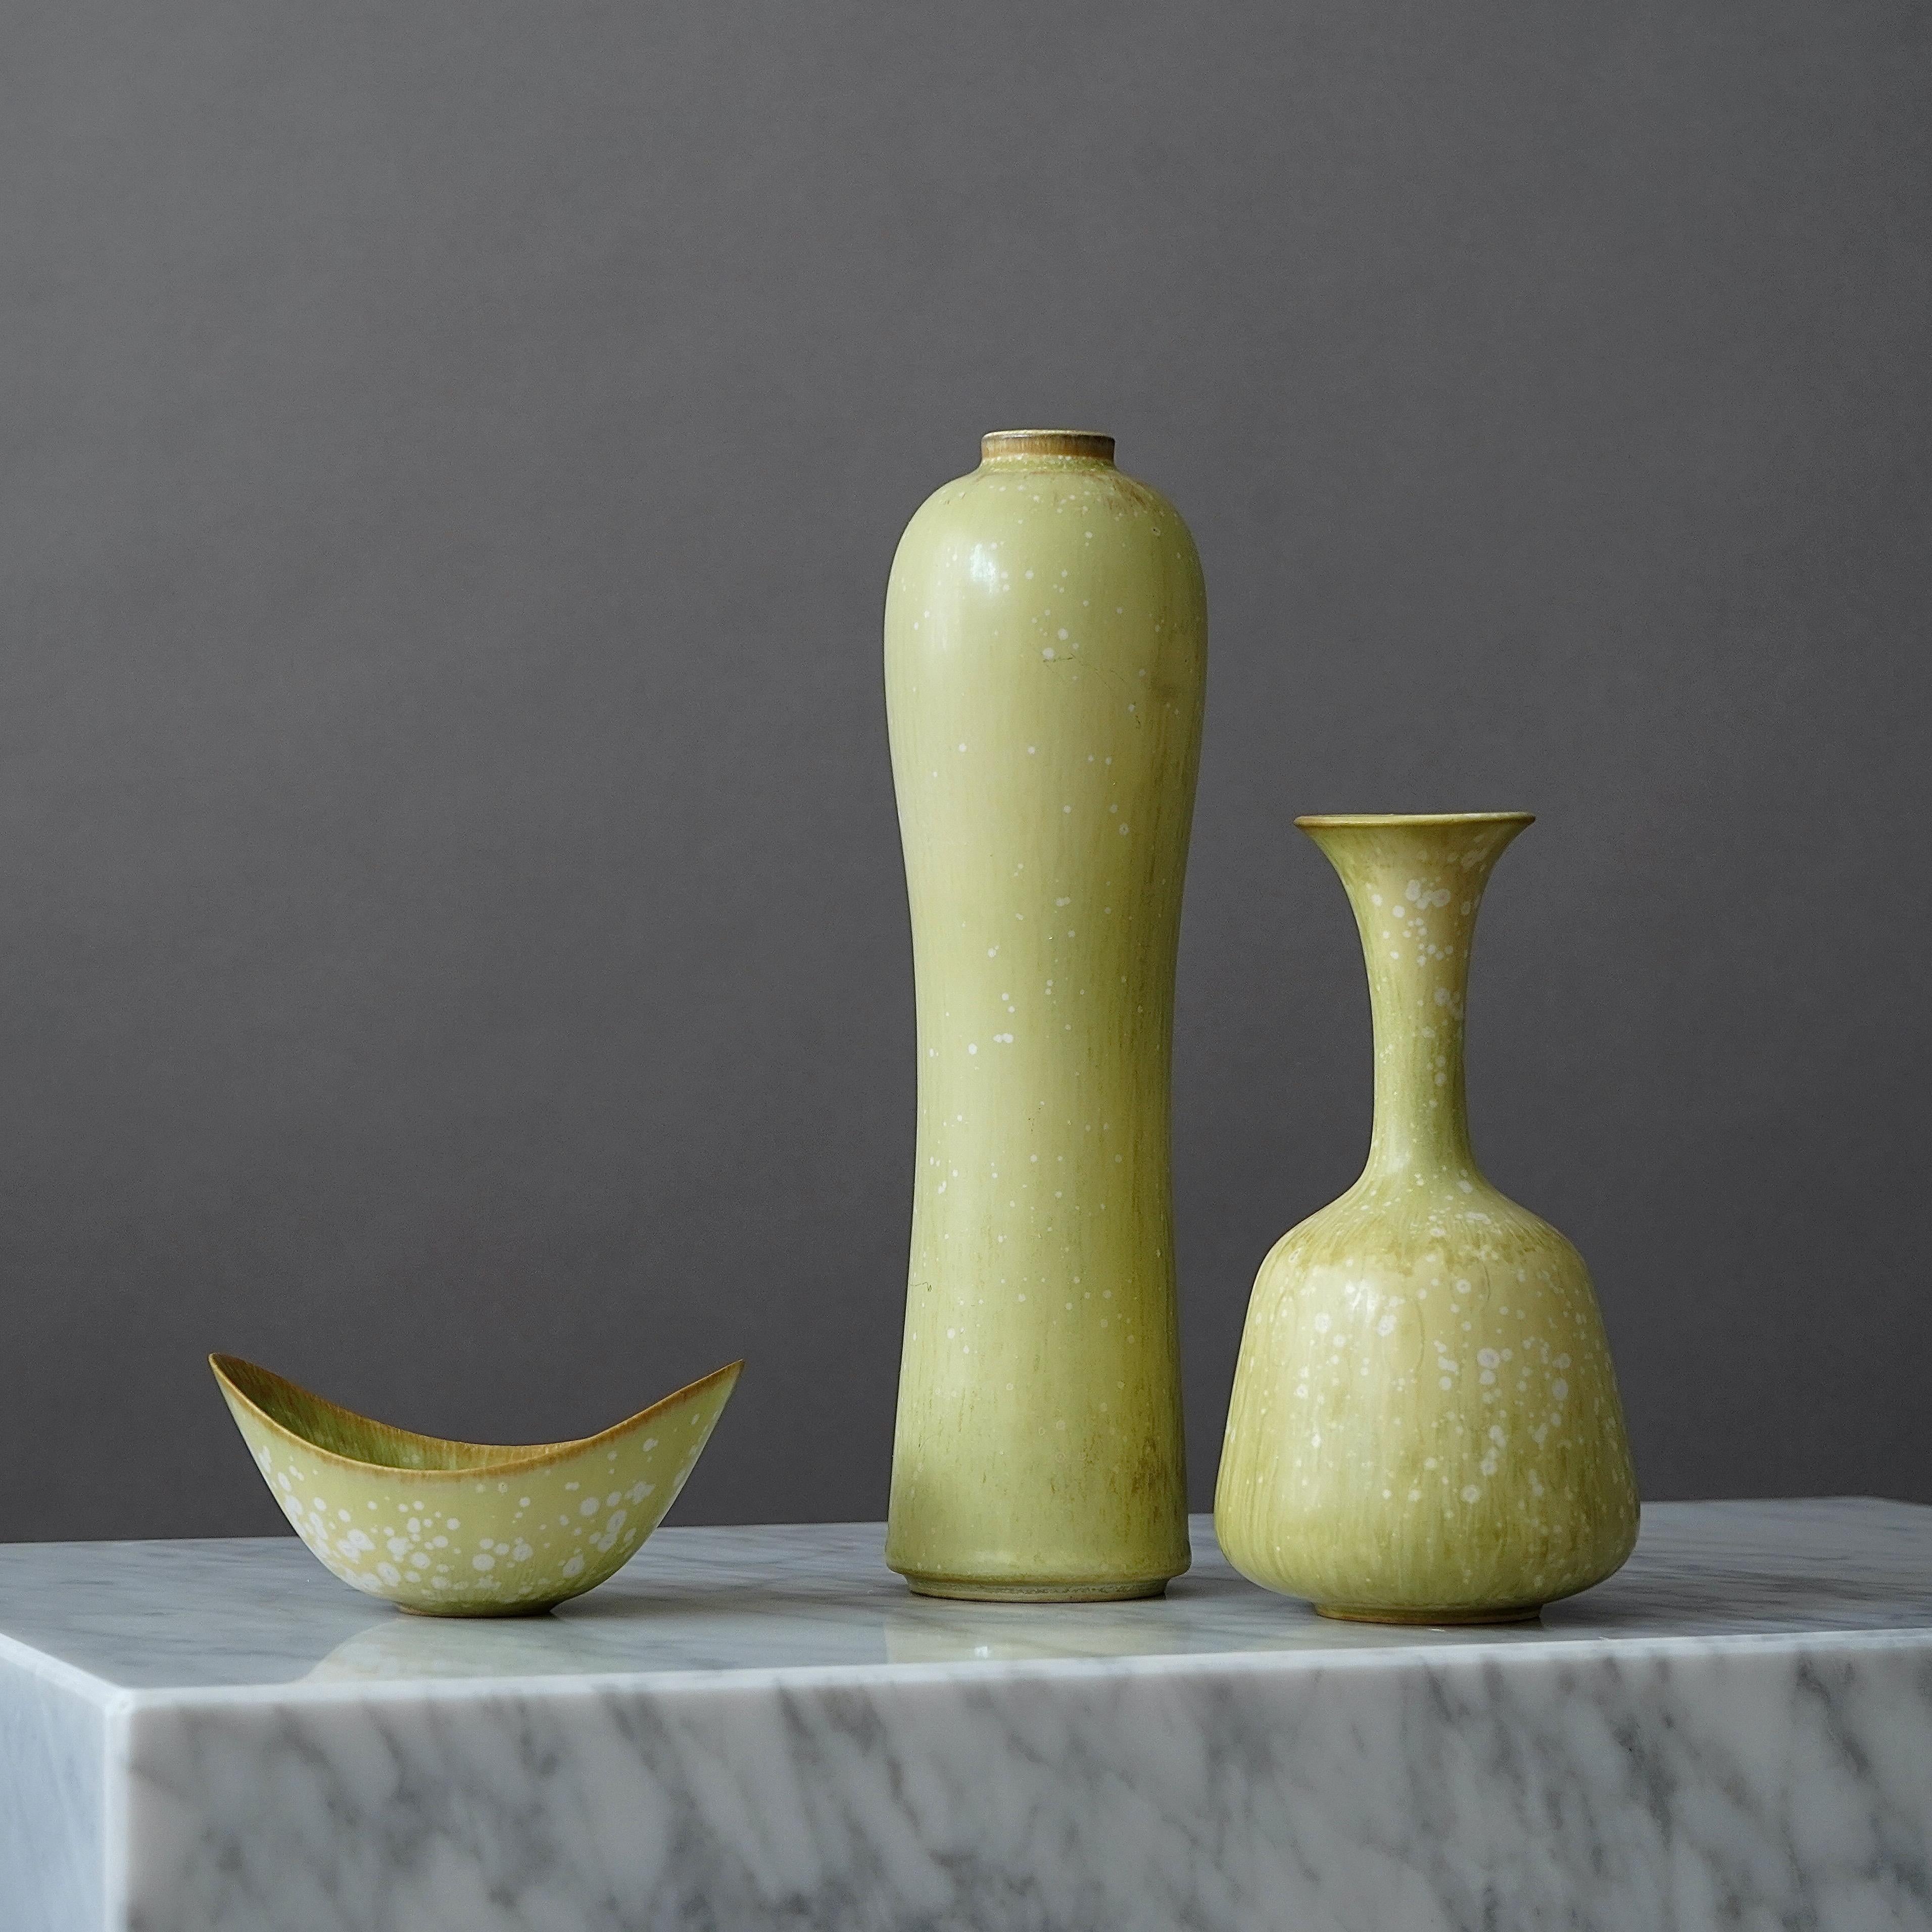 20th Century Set of 3 Stoneware Vases by Gunnar Nylund for Rorstrand, Sweden, 1950s For Sale